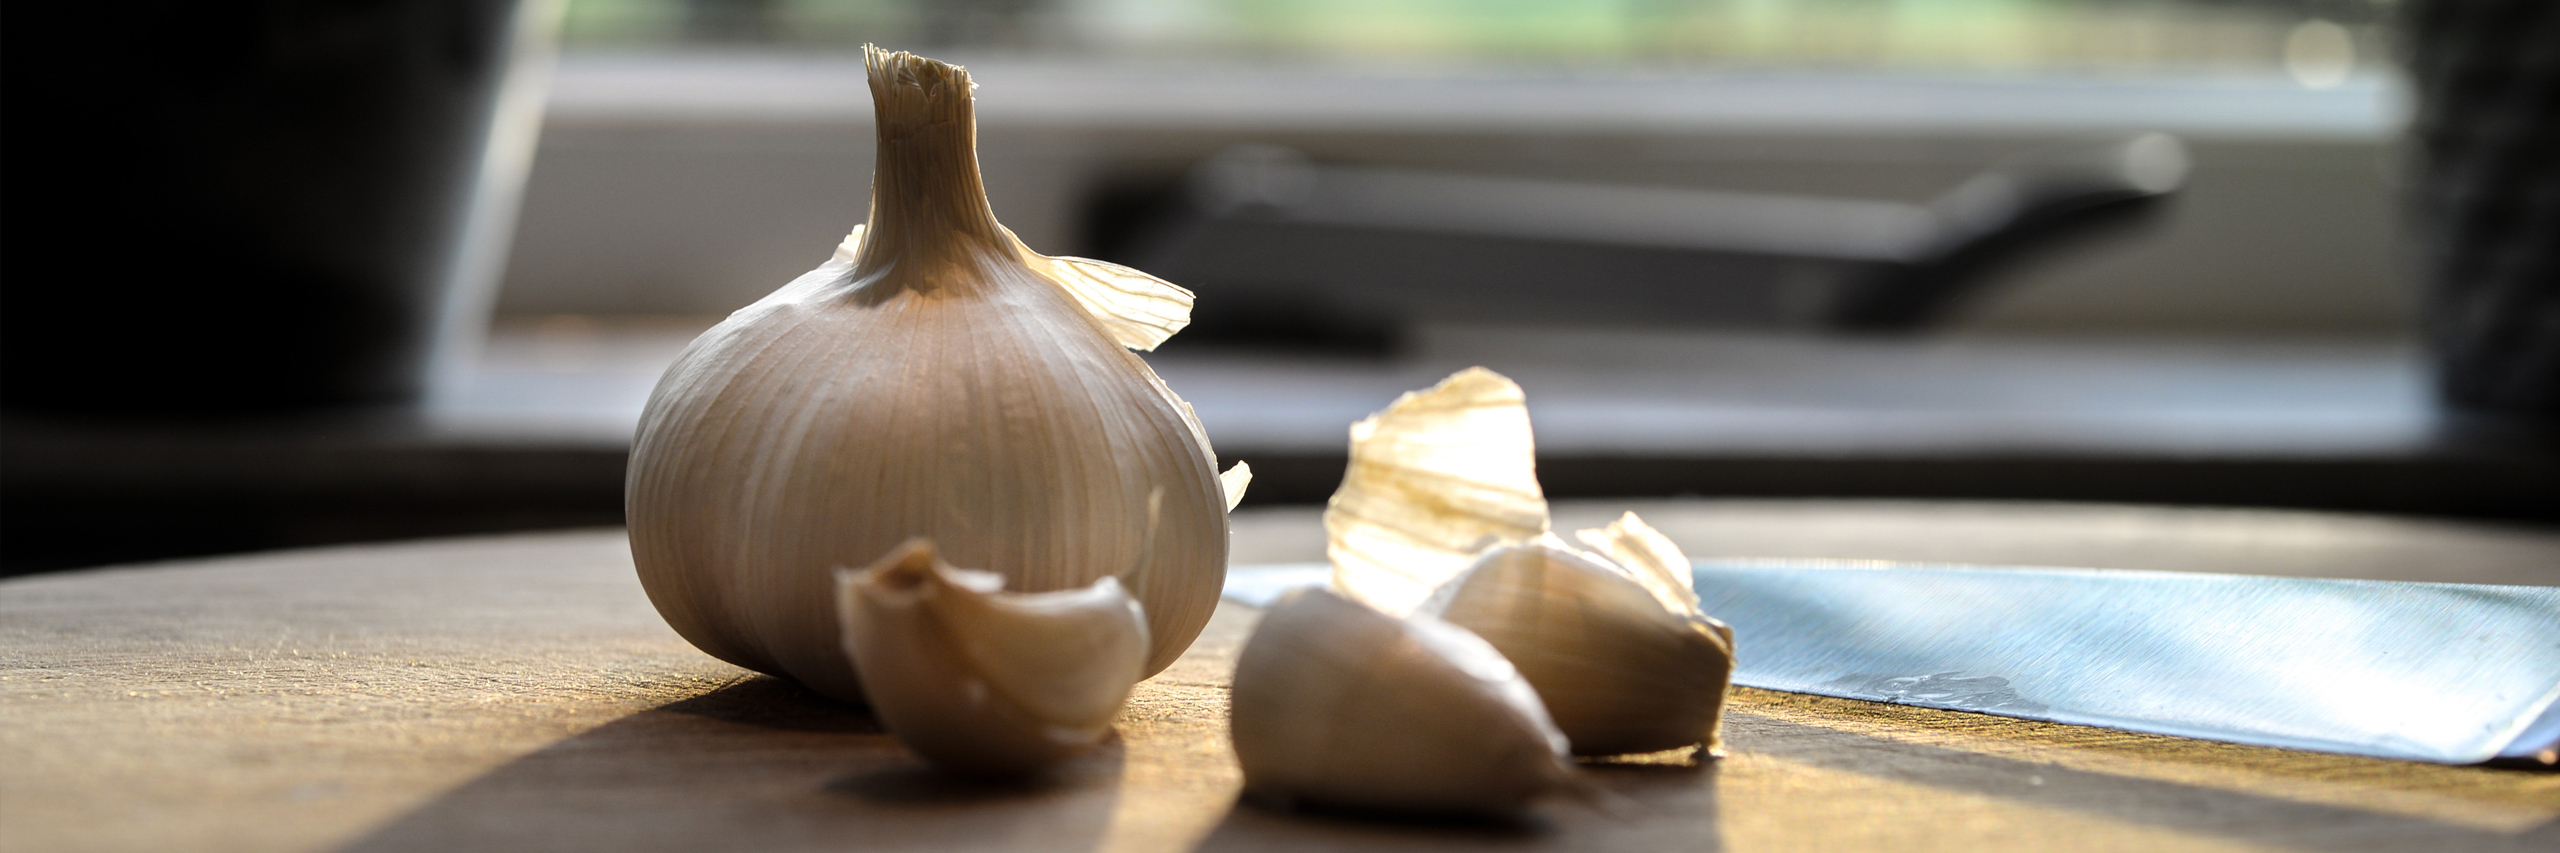 Garlic is great for your health